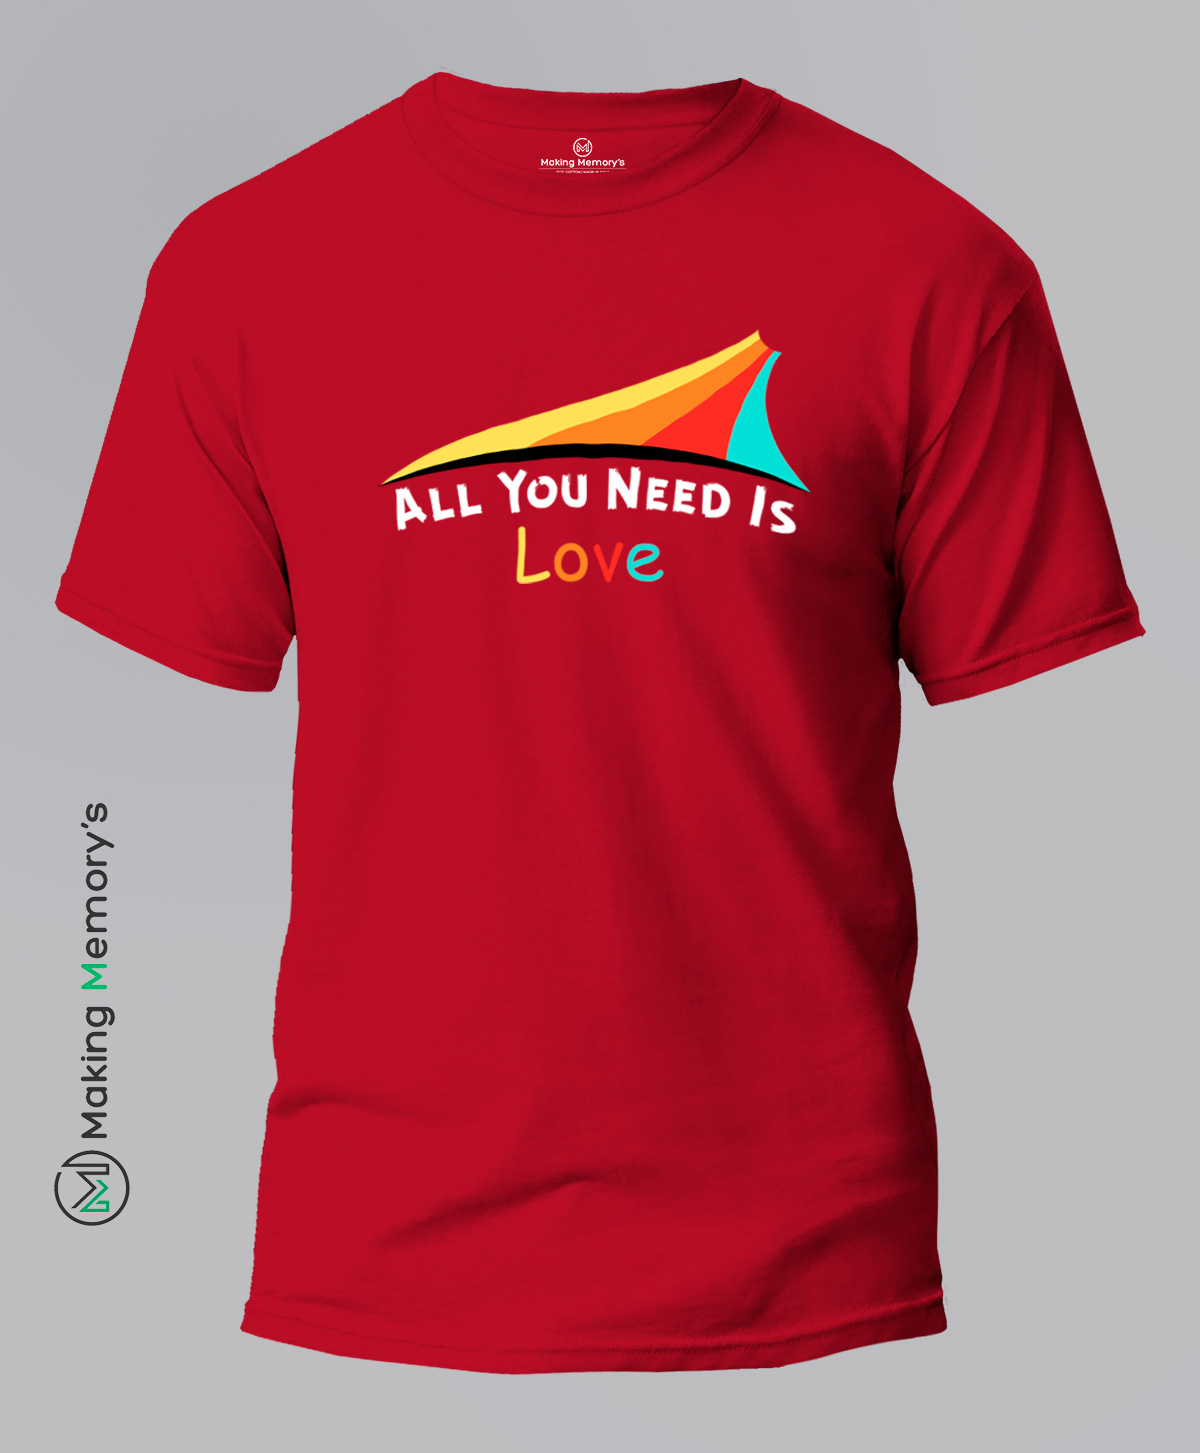 All-You-Need-Is-Love-Red-T-Shirt